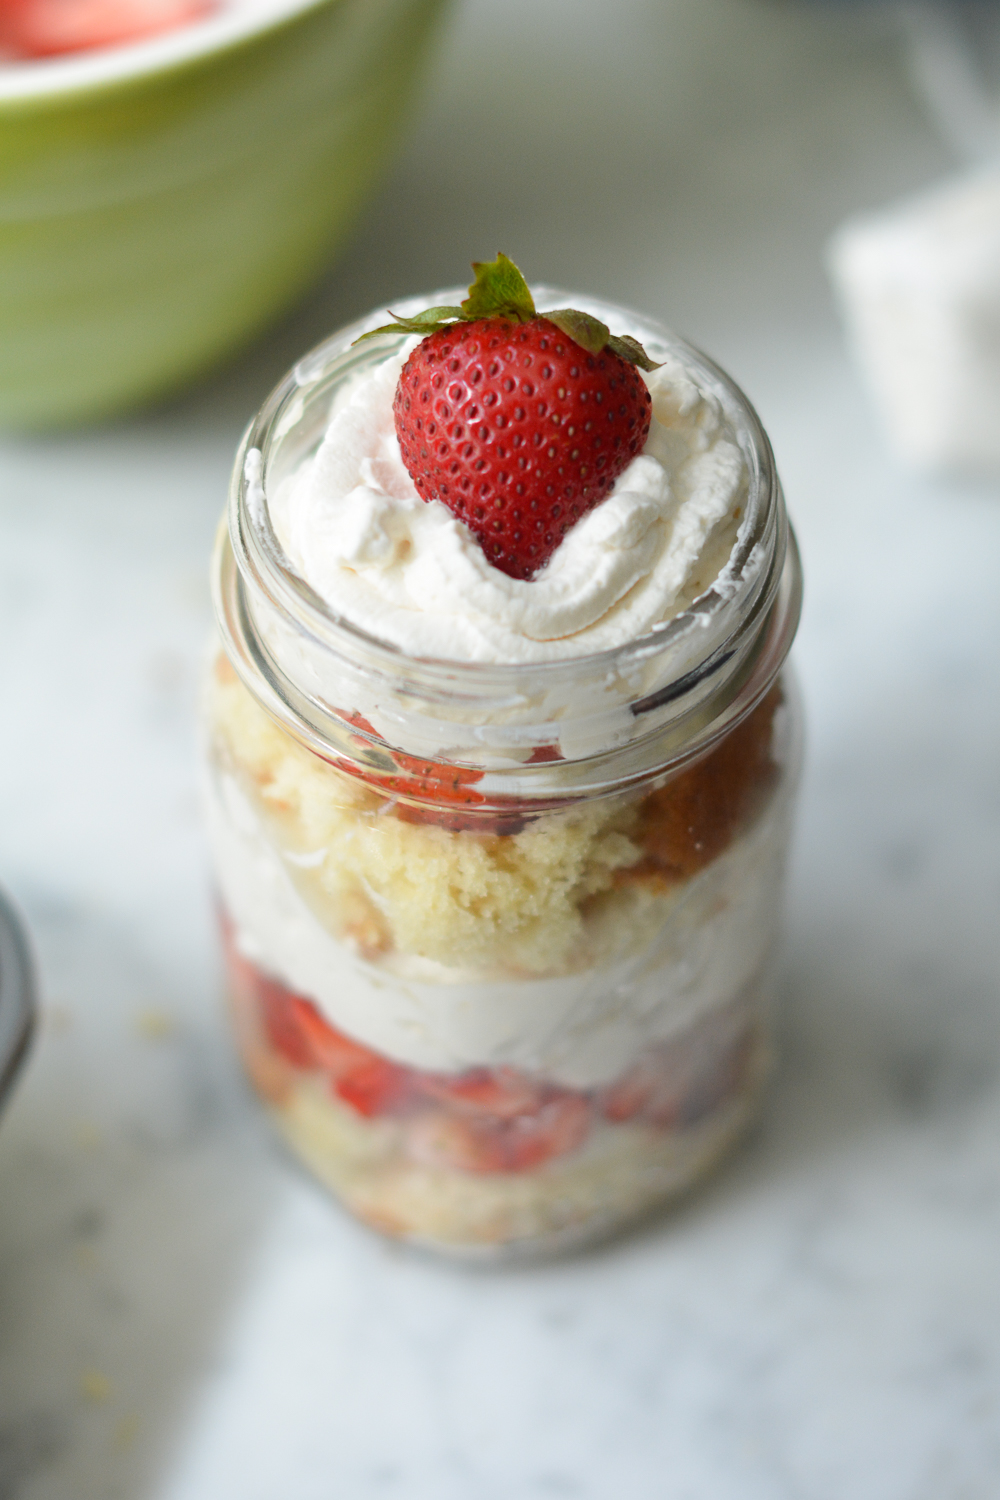 finished cake in a jar with a strawberry on top